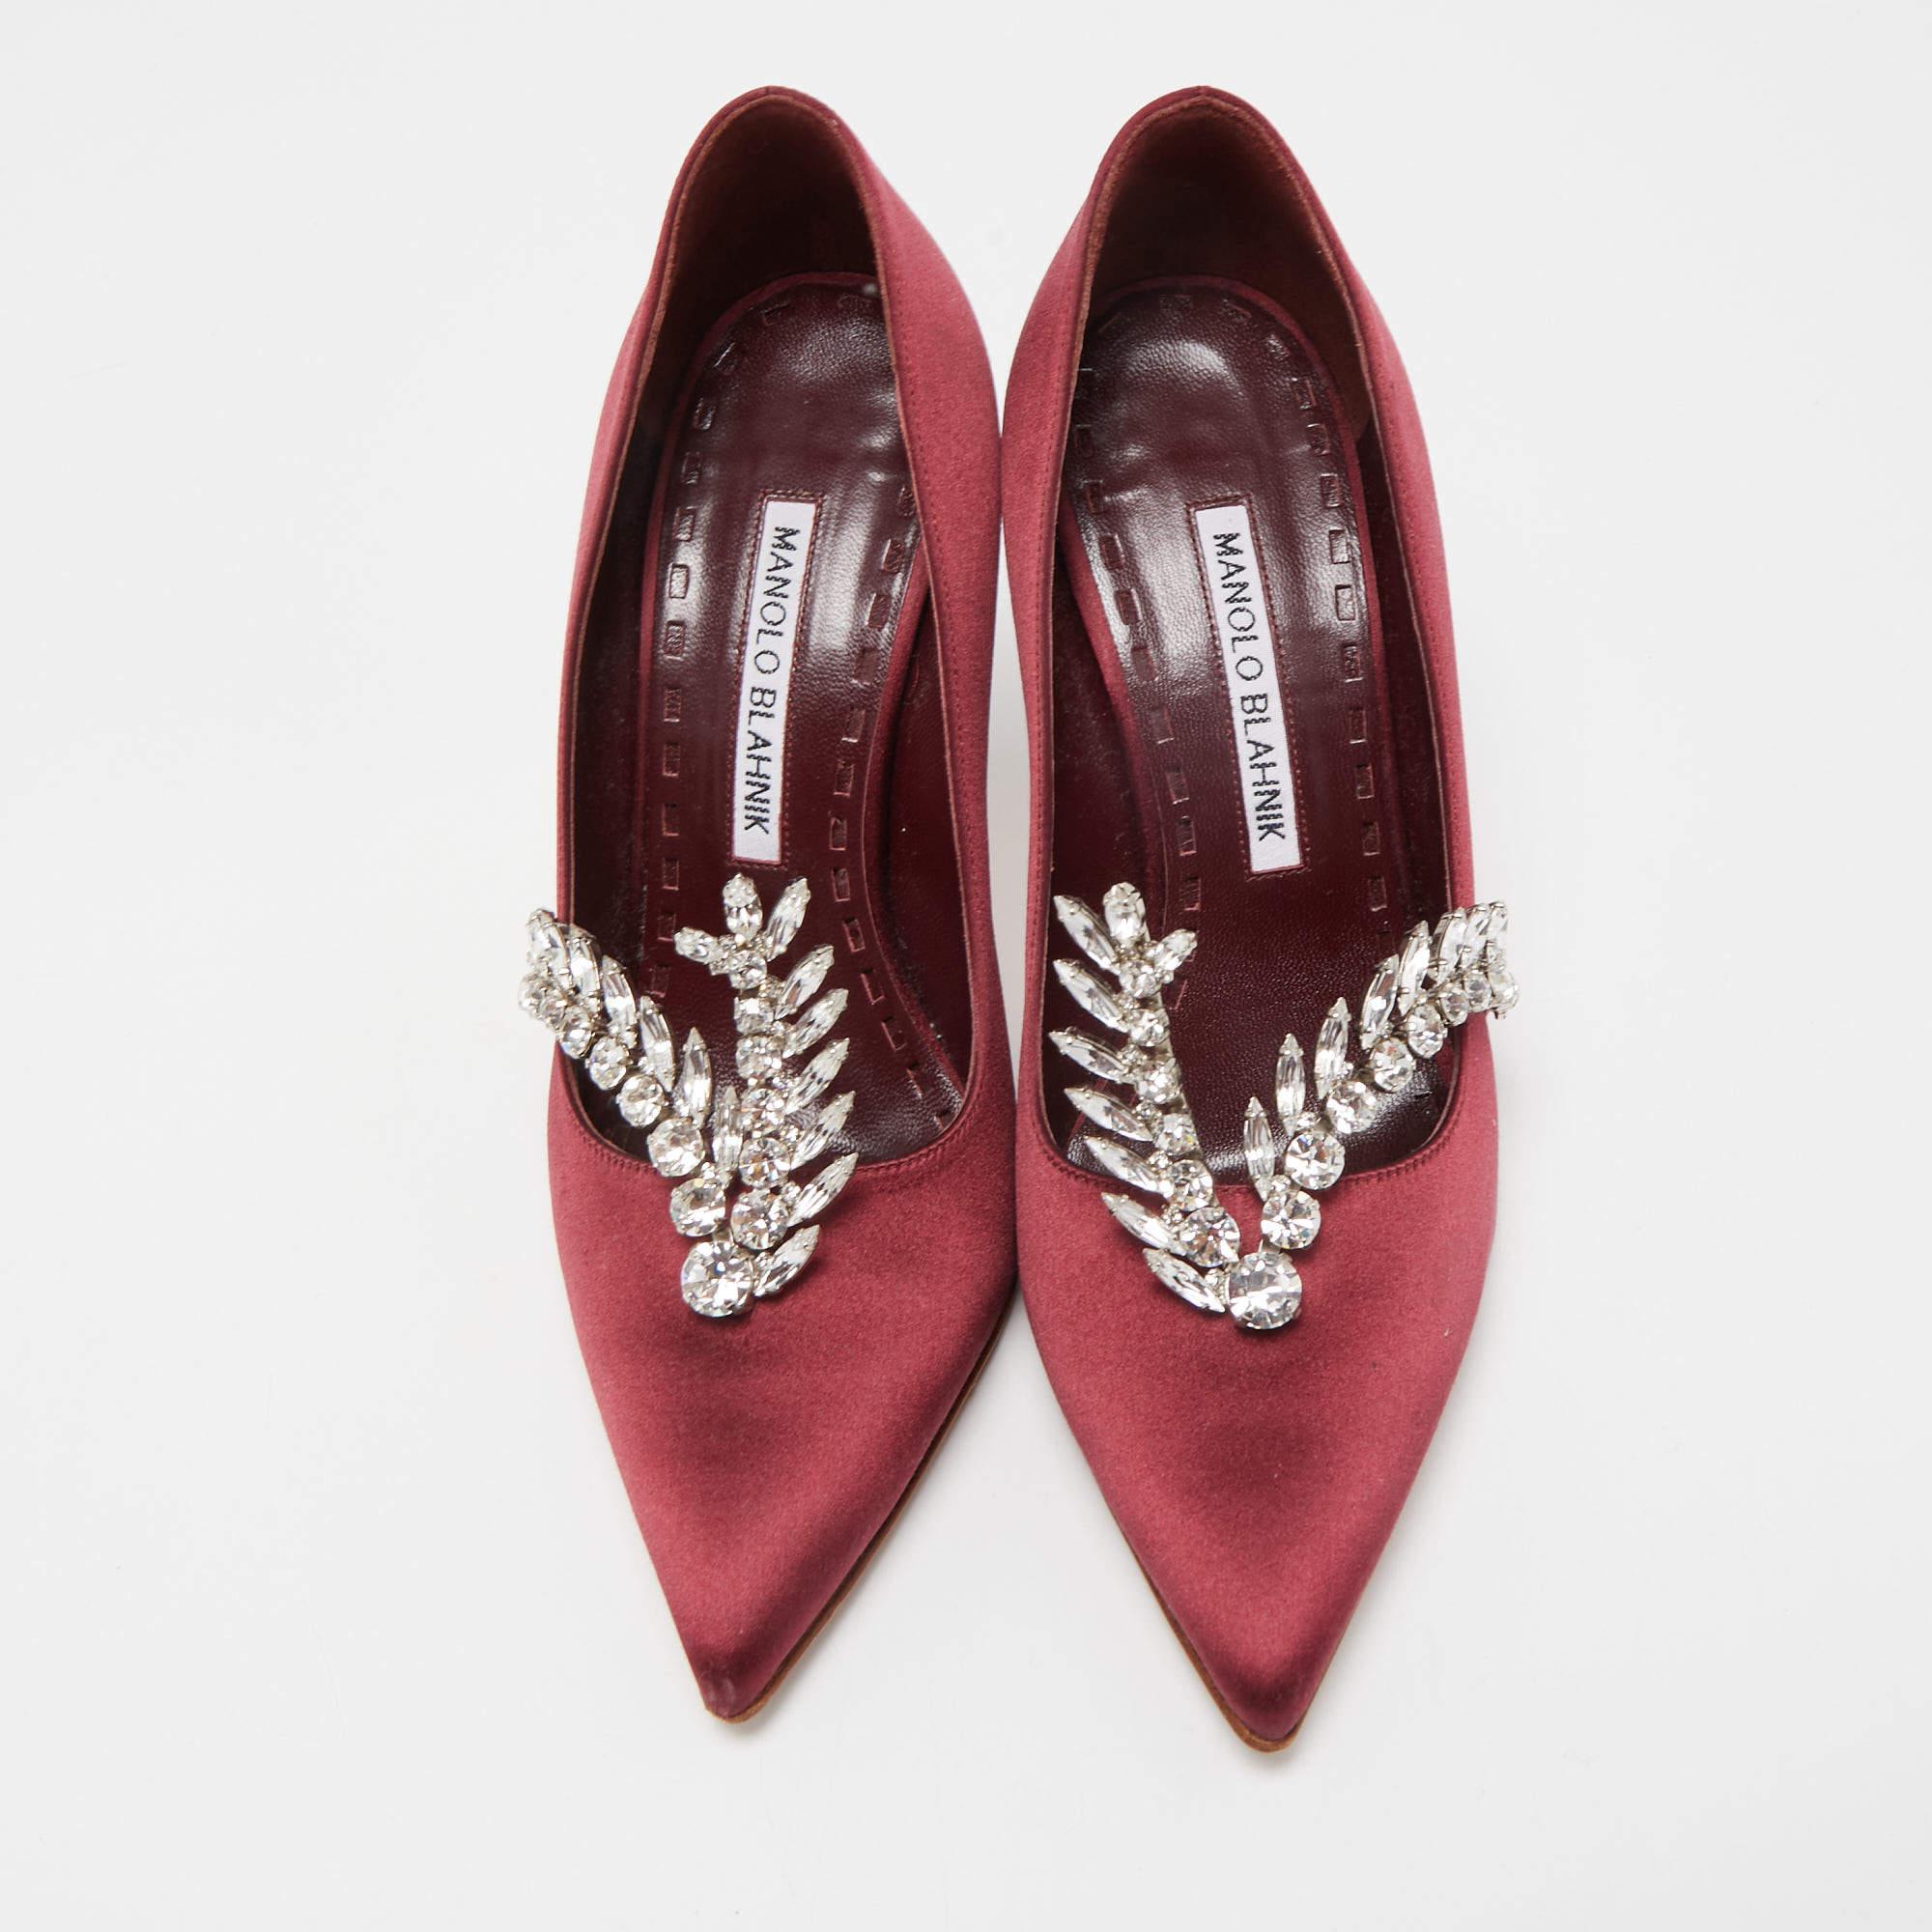 Complement your well-put-together outfit with these pumps by Manolo Blahnik. Grand and classy, they have an amazing construction for enduring quality and comfortable fit.

Includes: Original Box, Info Booklet

